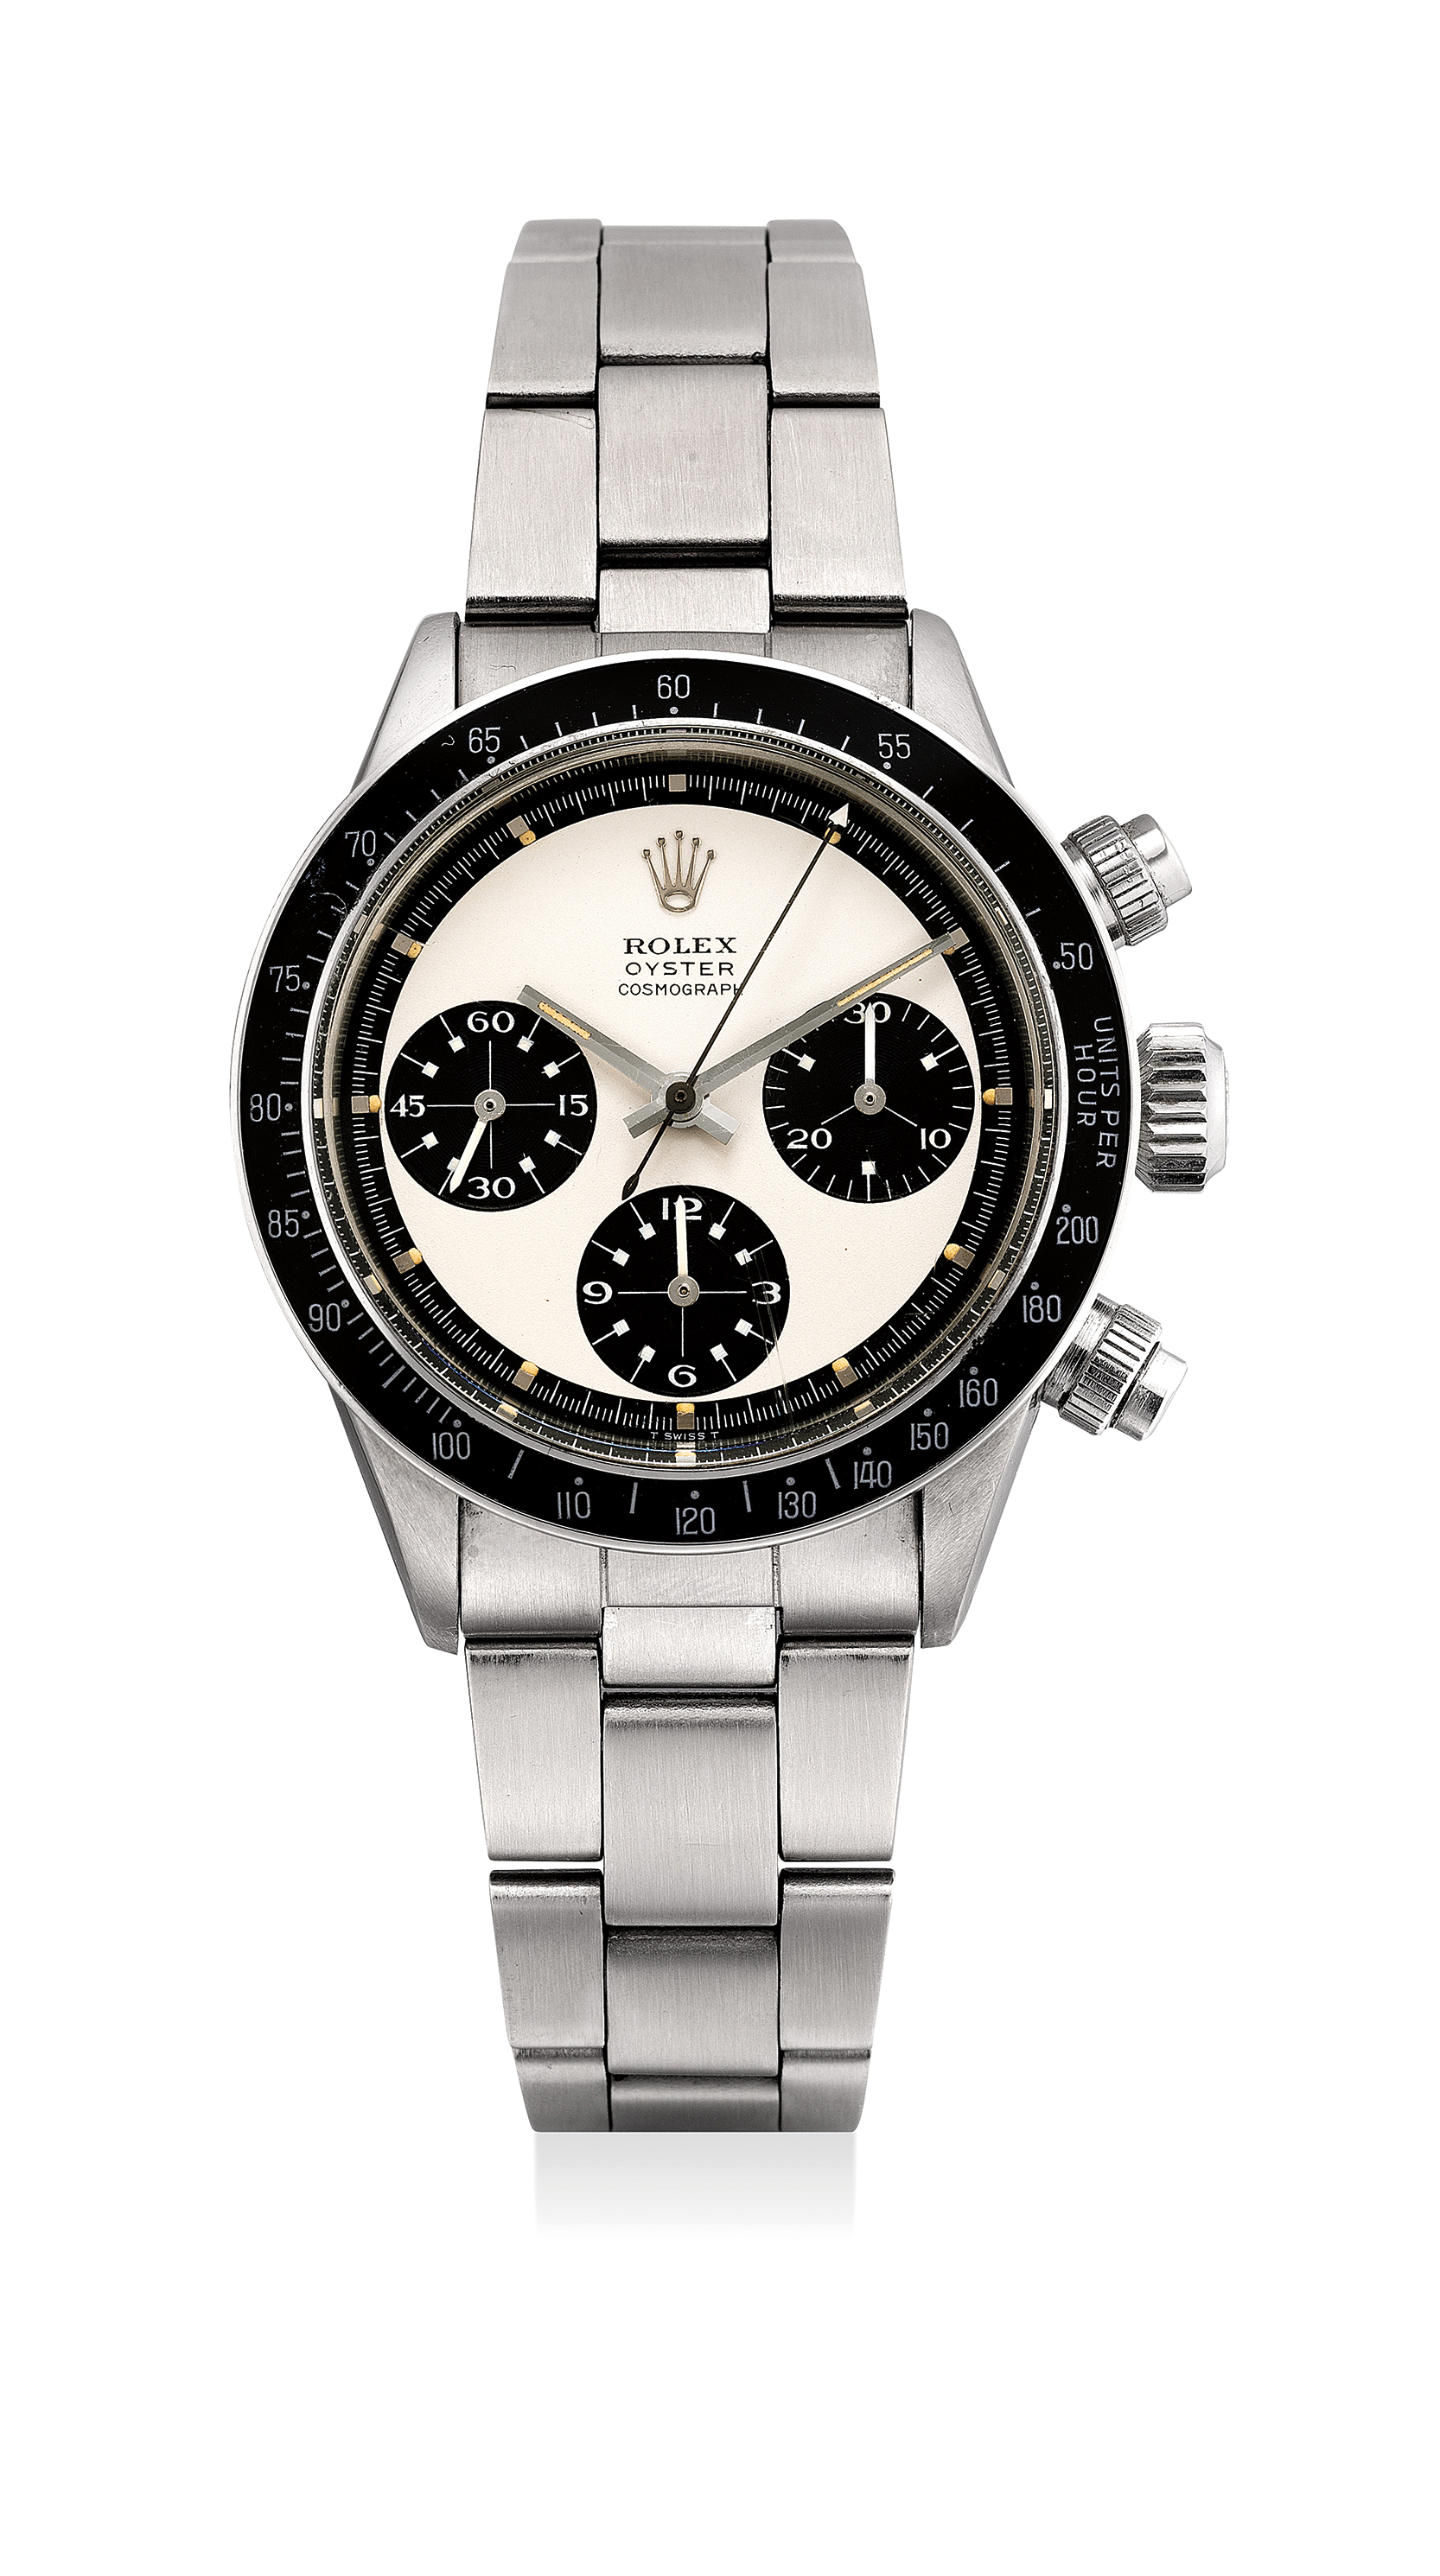 Stainless steel chronograph, equipped with 